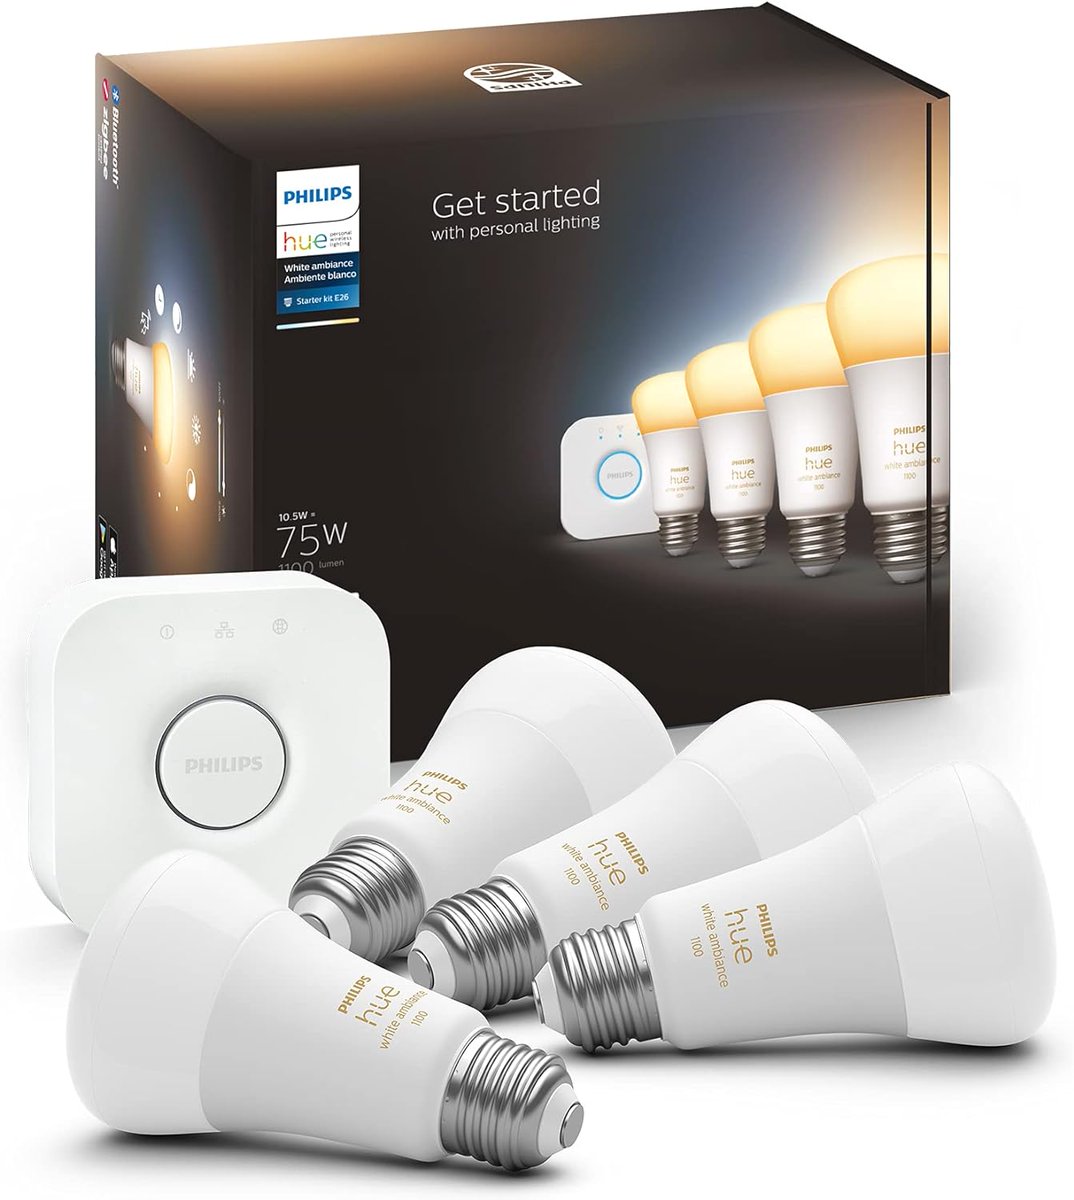 Control your lights with your voice!  Upgrade your home with the Philips Hue Starter Kit. 
Product link: tinyurl.com/2cswp96o

#vlyzon #SmartHomeTech #UpgradeYourHome #EffortlessLiving #HomeAutomation #PhilipsHue #SmartLighting #SkylosFairLaunch